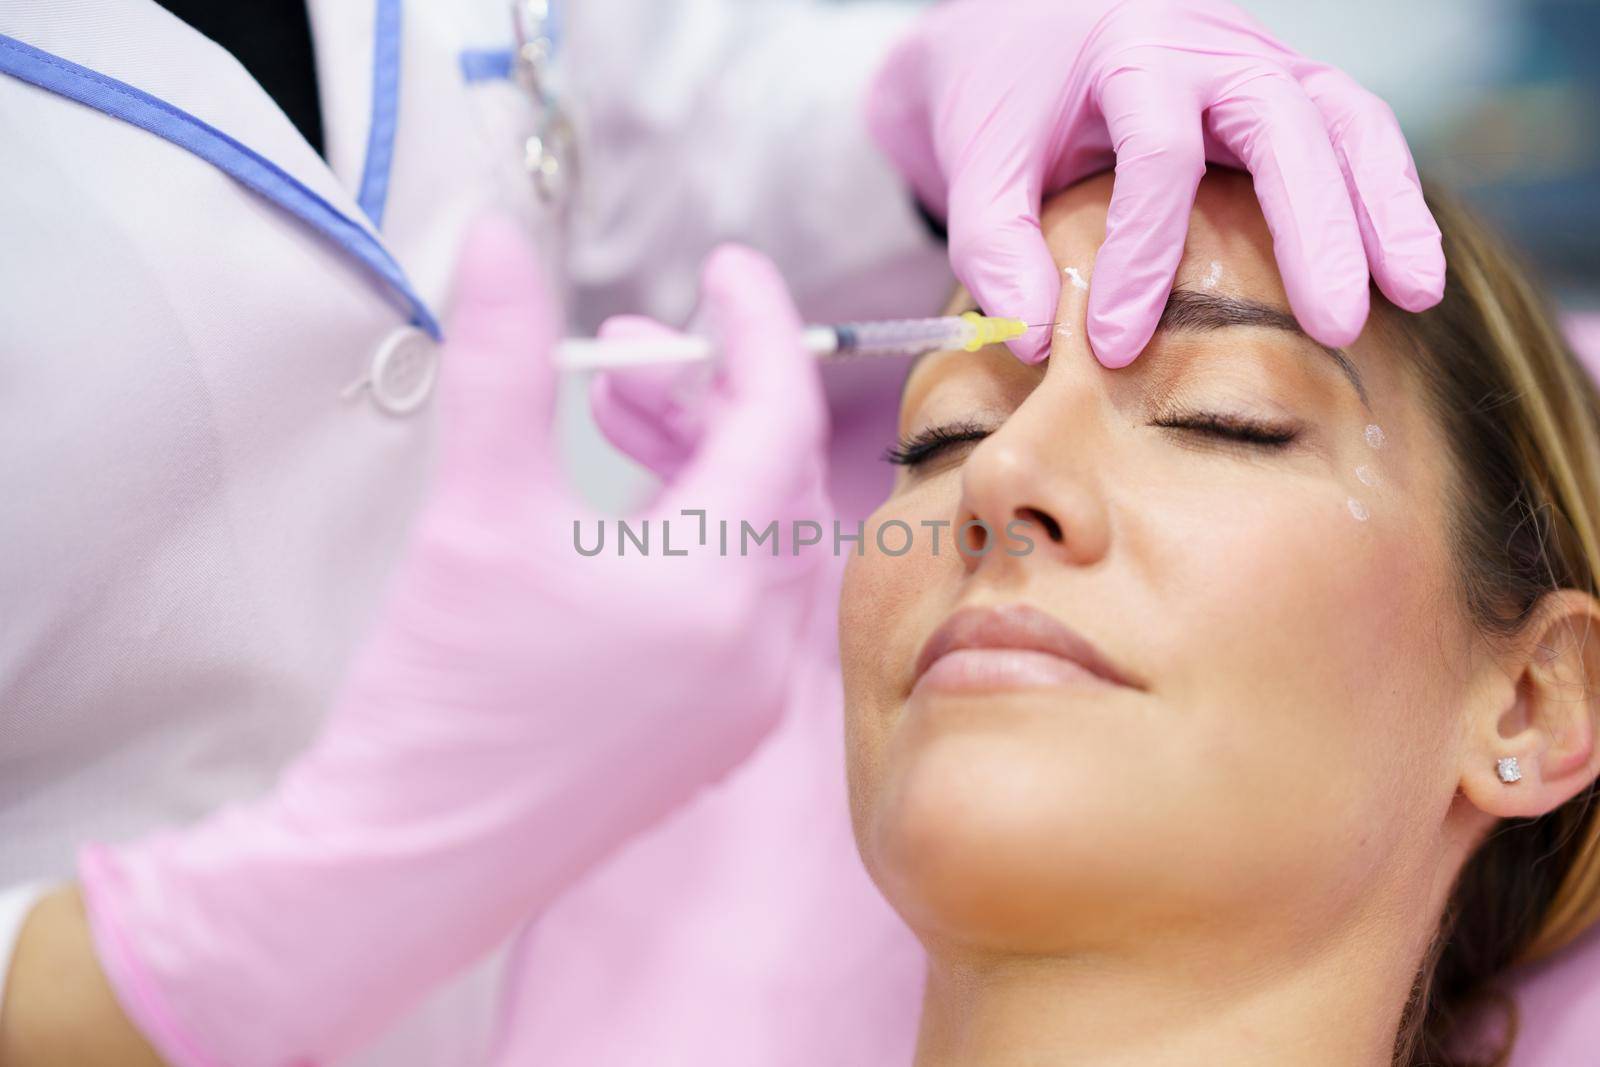 Aesthetic doctor injecting botulinum toxin into the forehead of her middle-aged patient. Facial treatment done in a cosmetic surgery clinic.